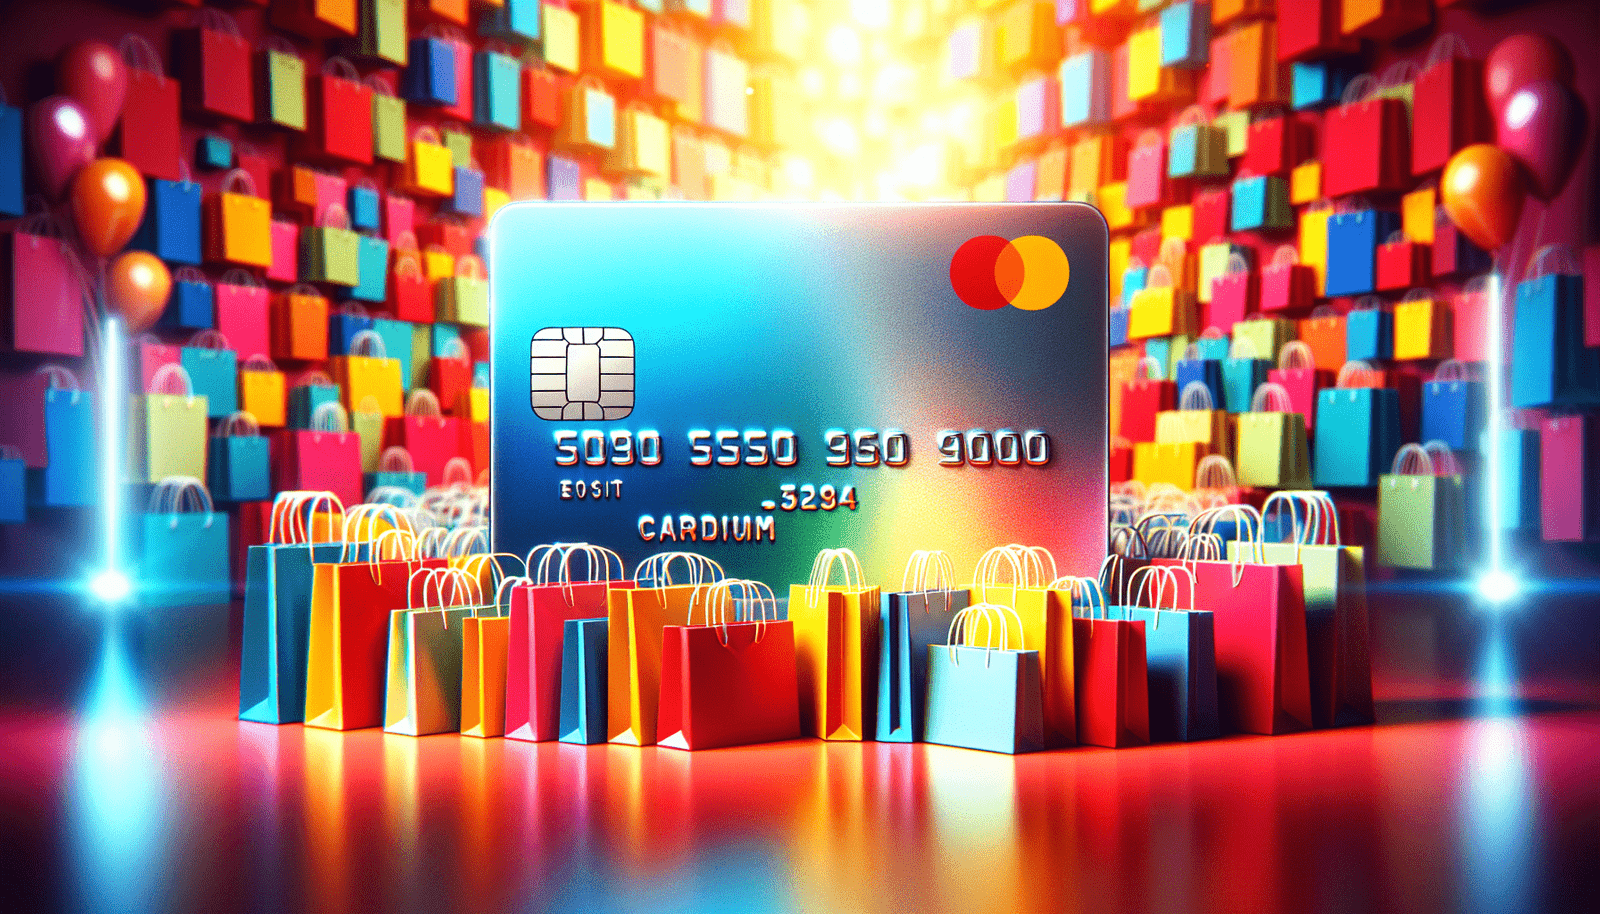 The Ultimate Guide To Finding The Best Credit Card For Shopping In Malaysia